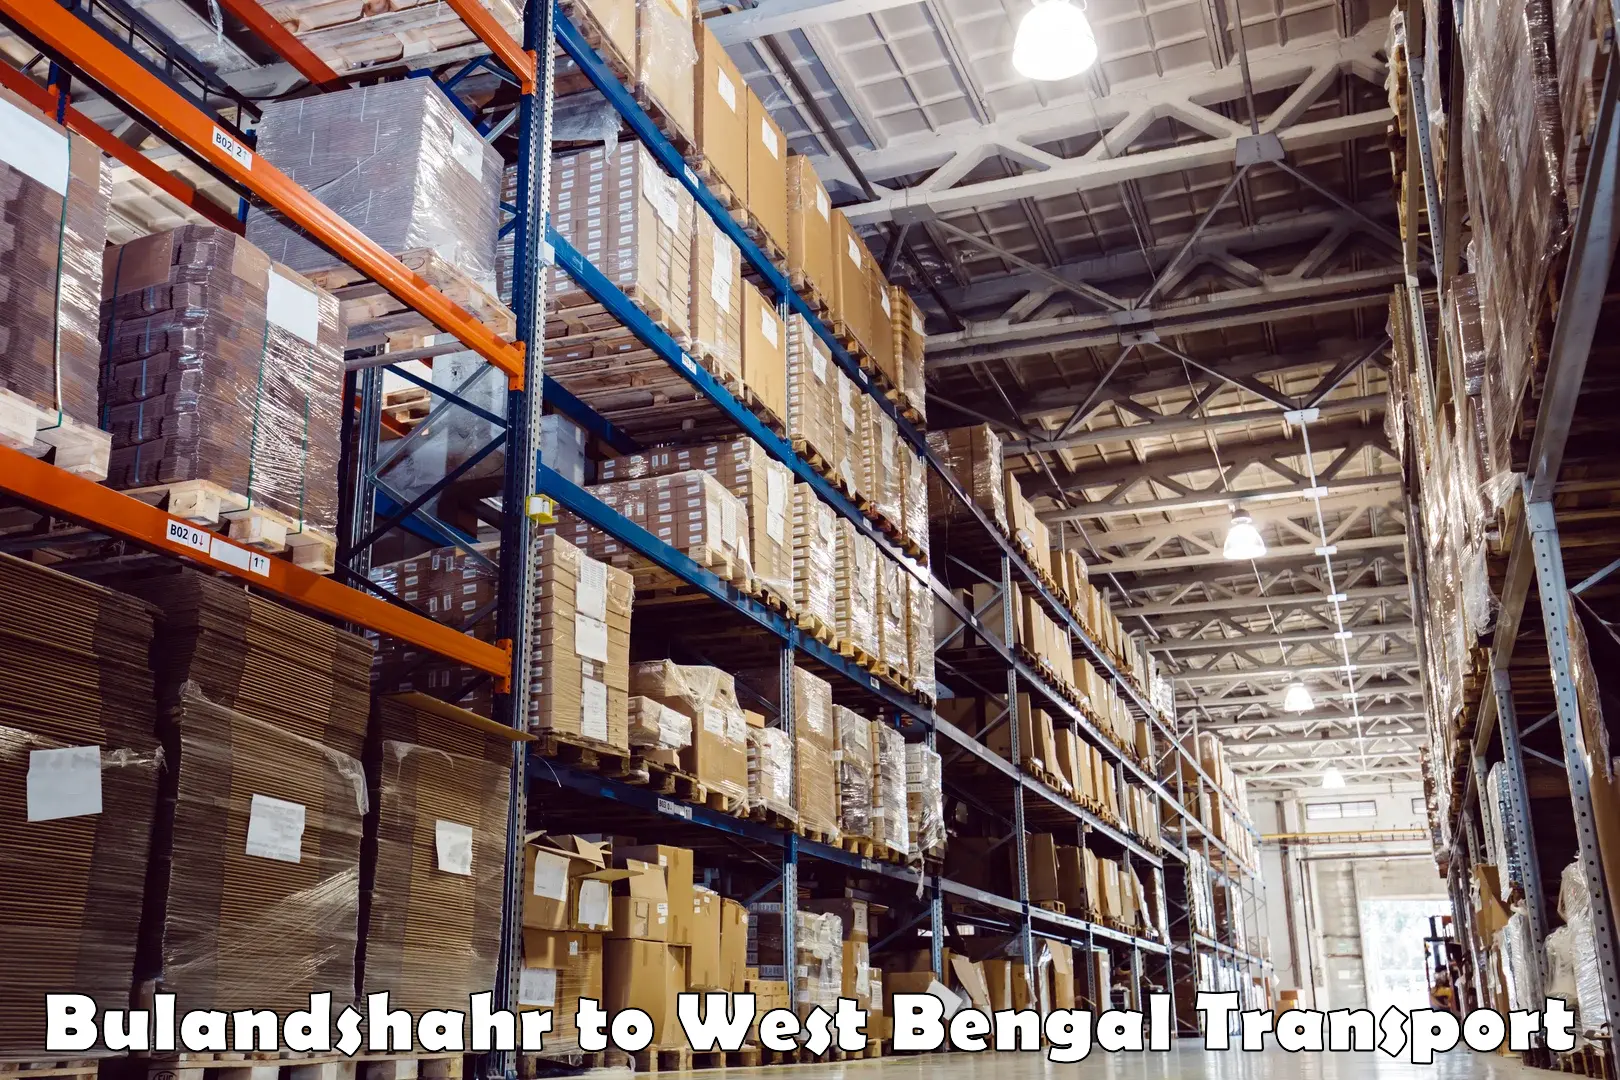 Express transport services in Bulandshahr to West Bengal